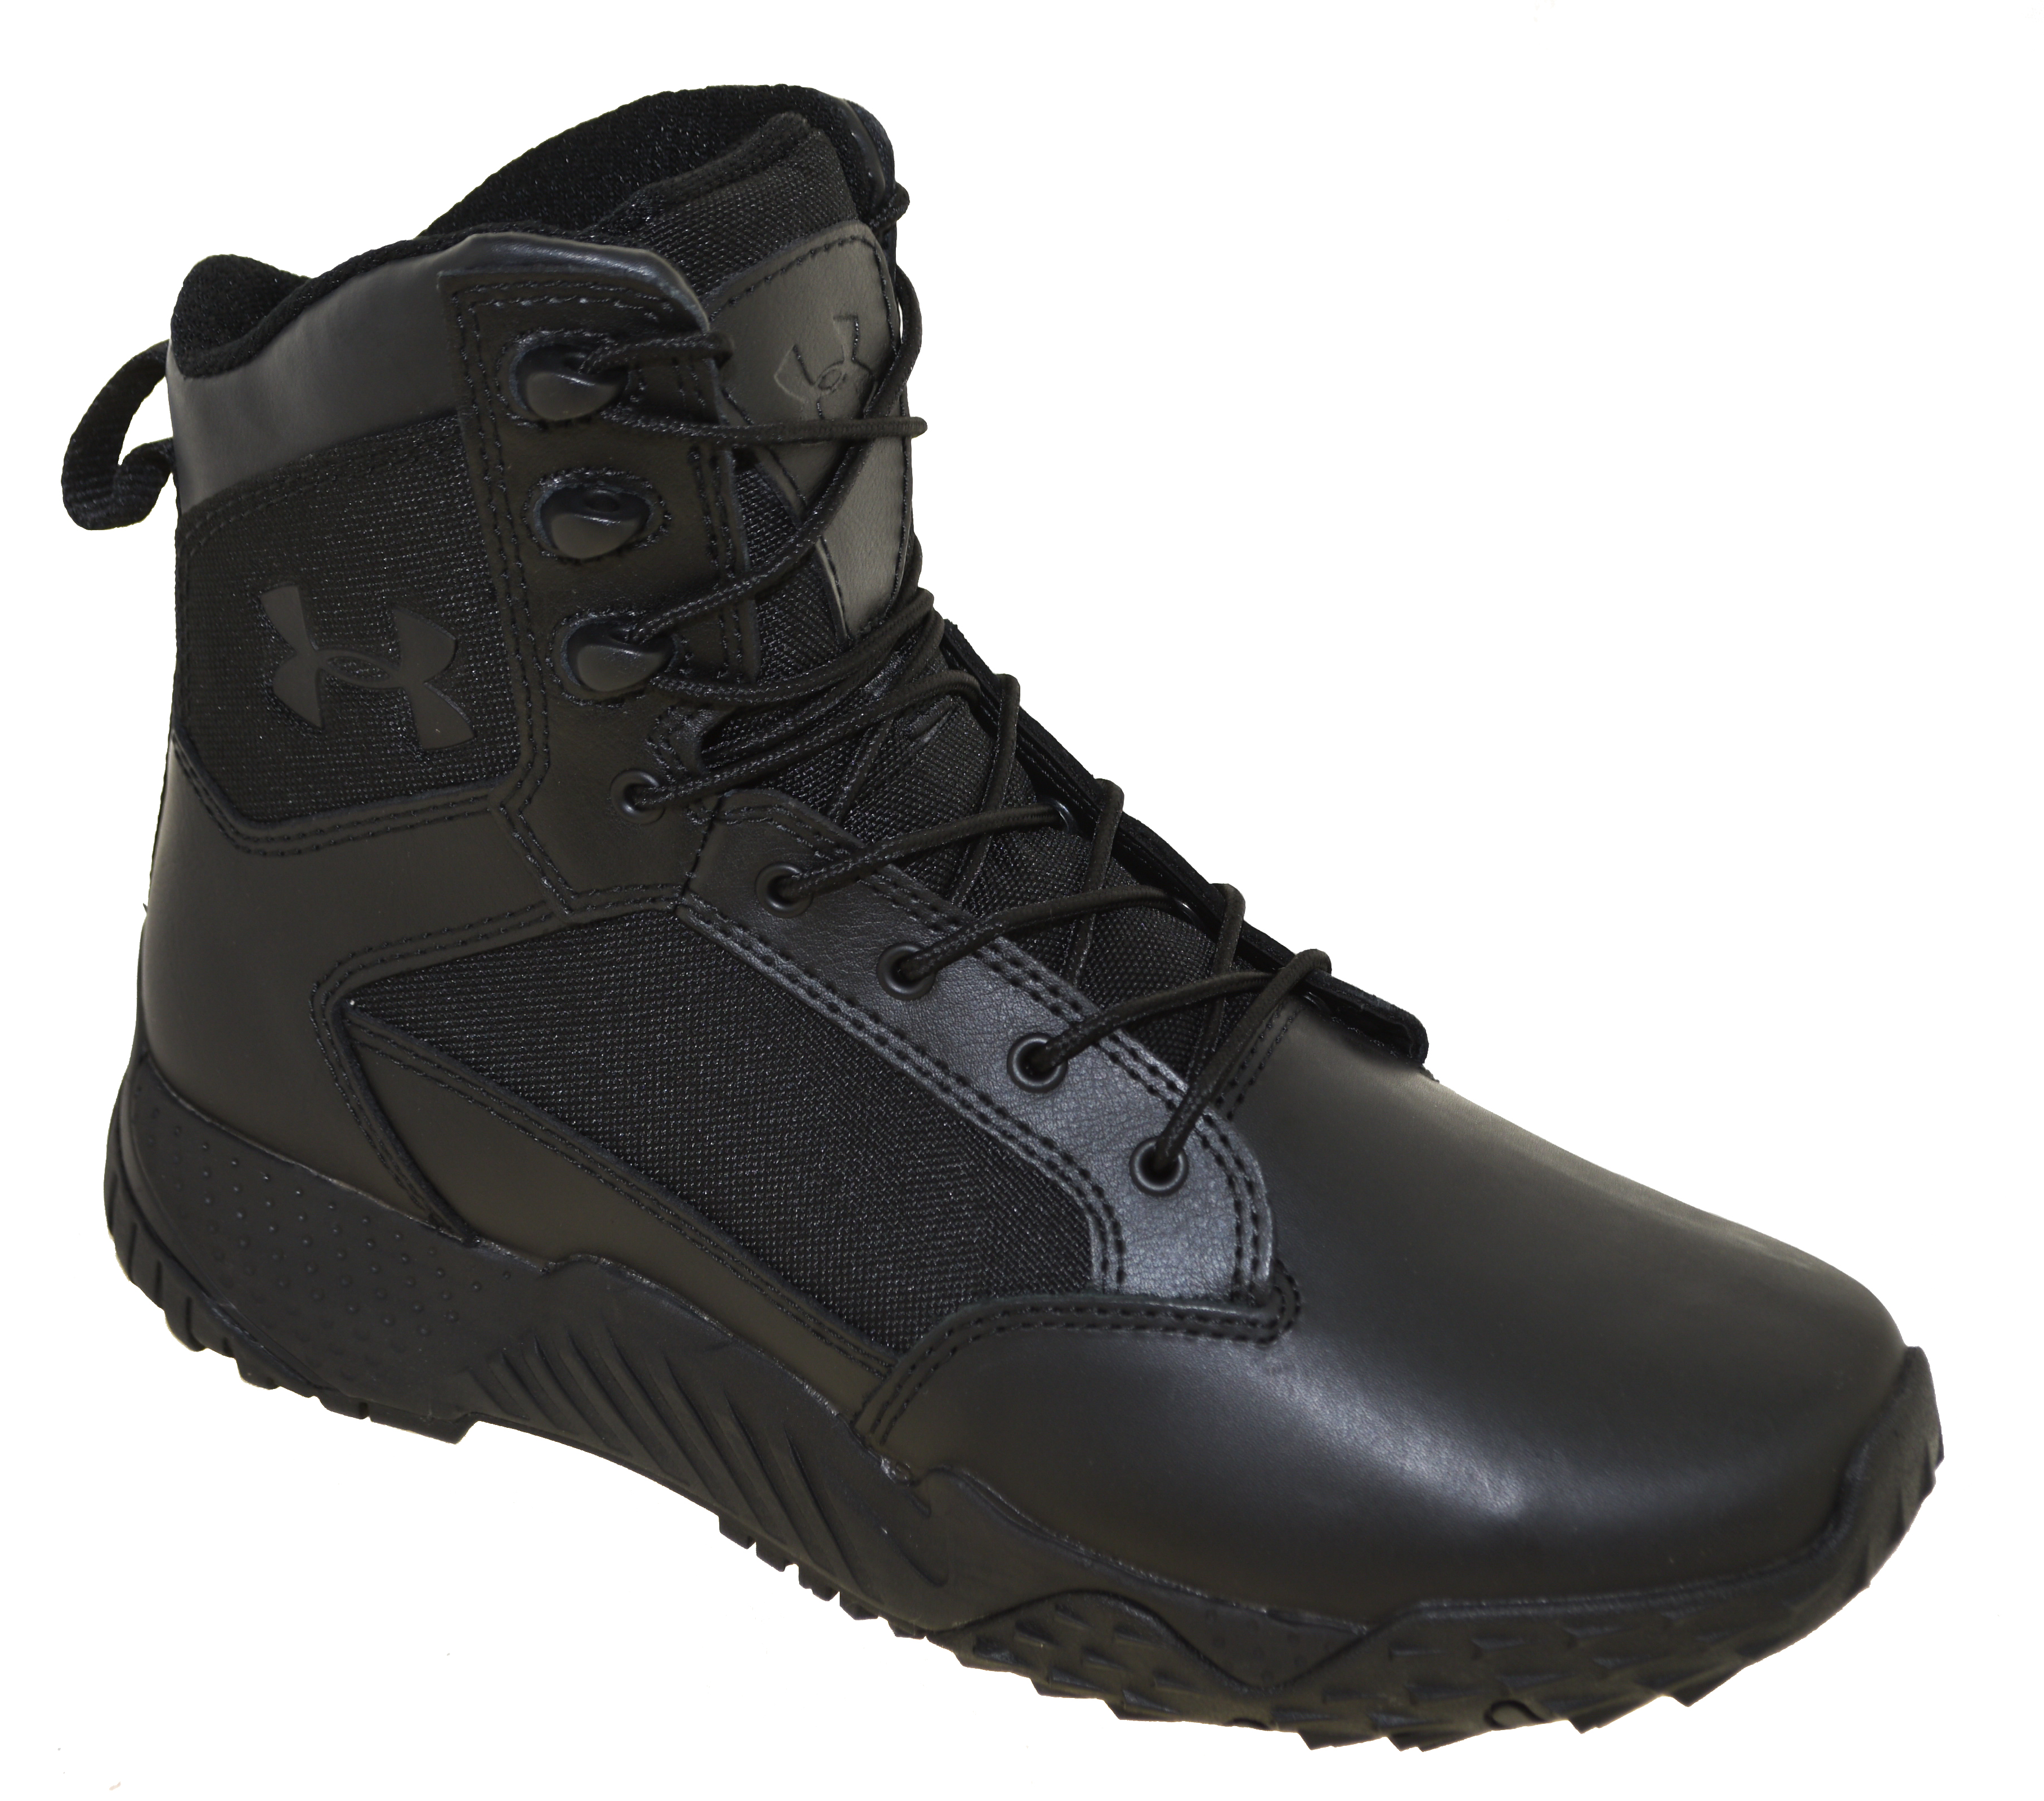 Under Armour Men's Stellar Tactical Boots Black Medium and 2E Sizes ...